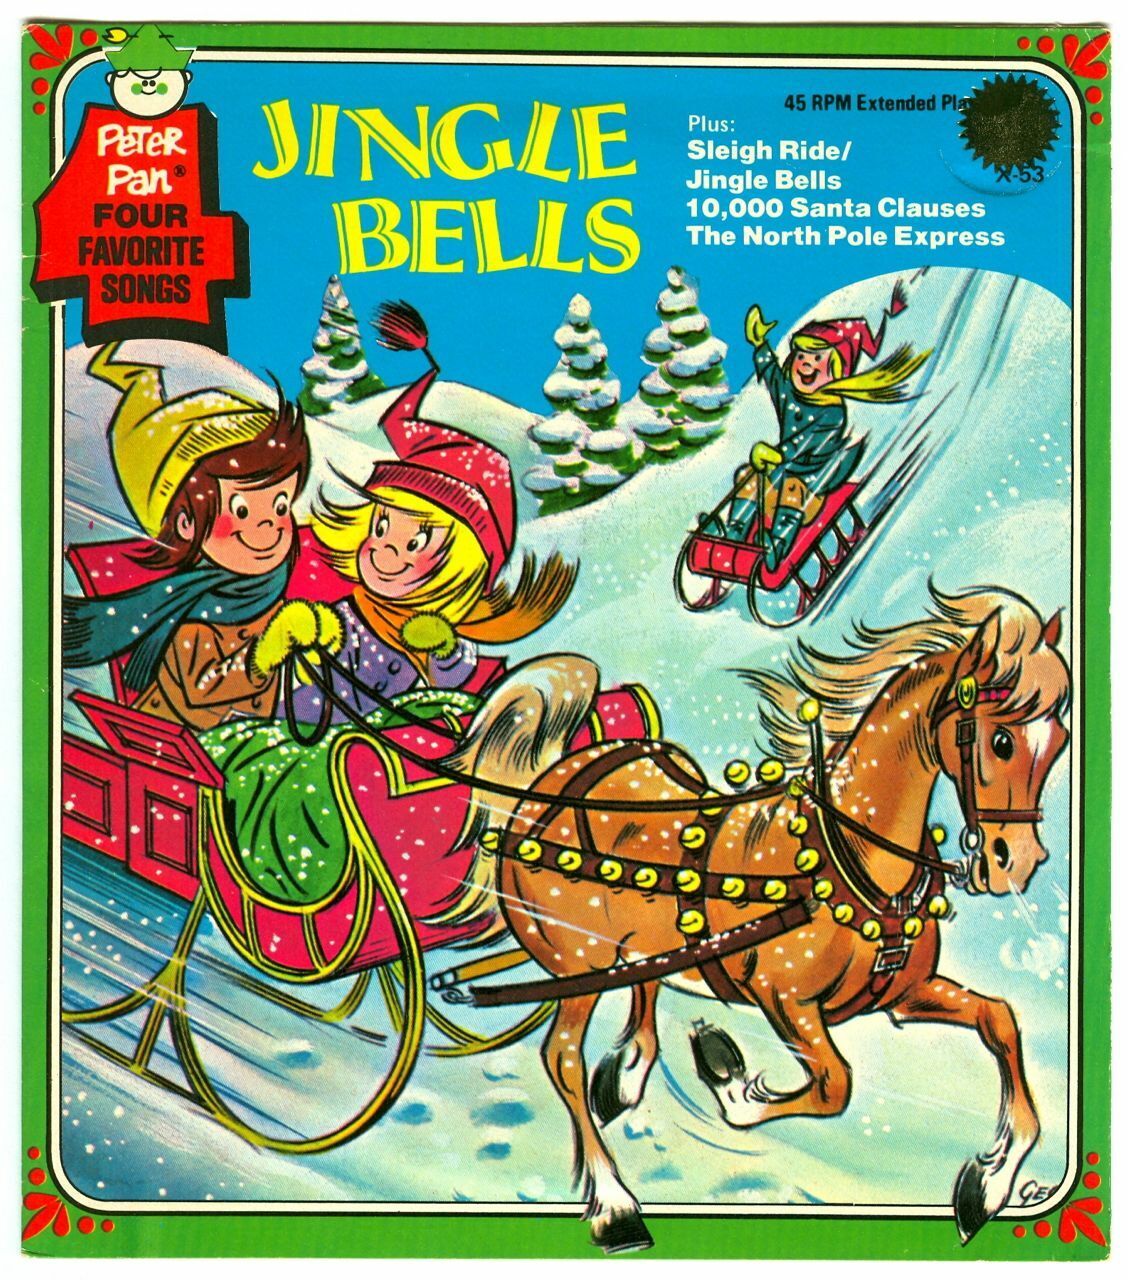 Vintage JINGLE BELLS Peter Pan Records EP X-53 Sleigh Ride & More (45 RPM)